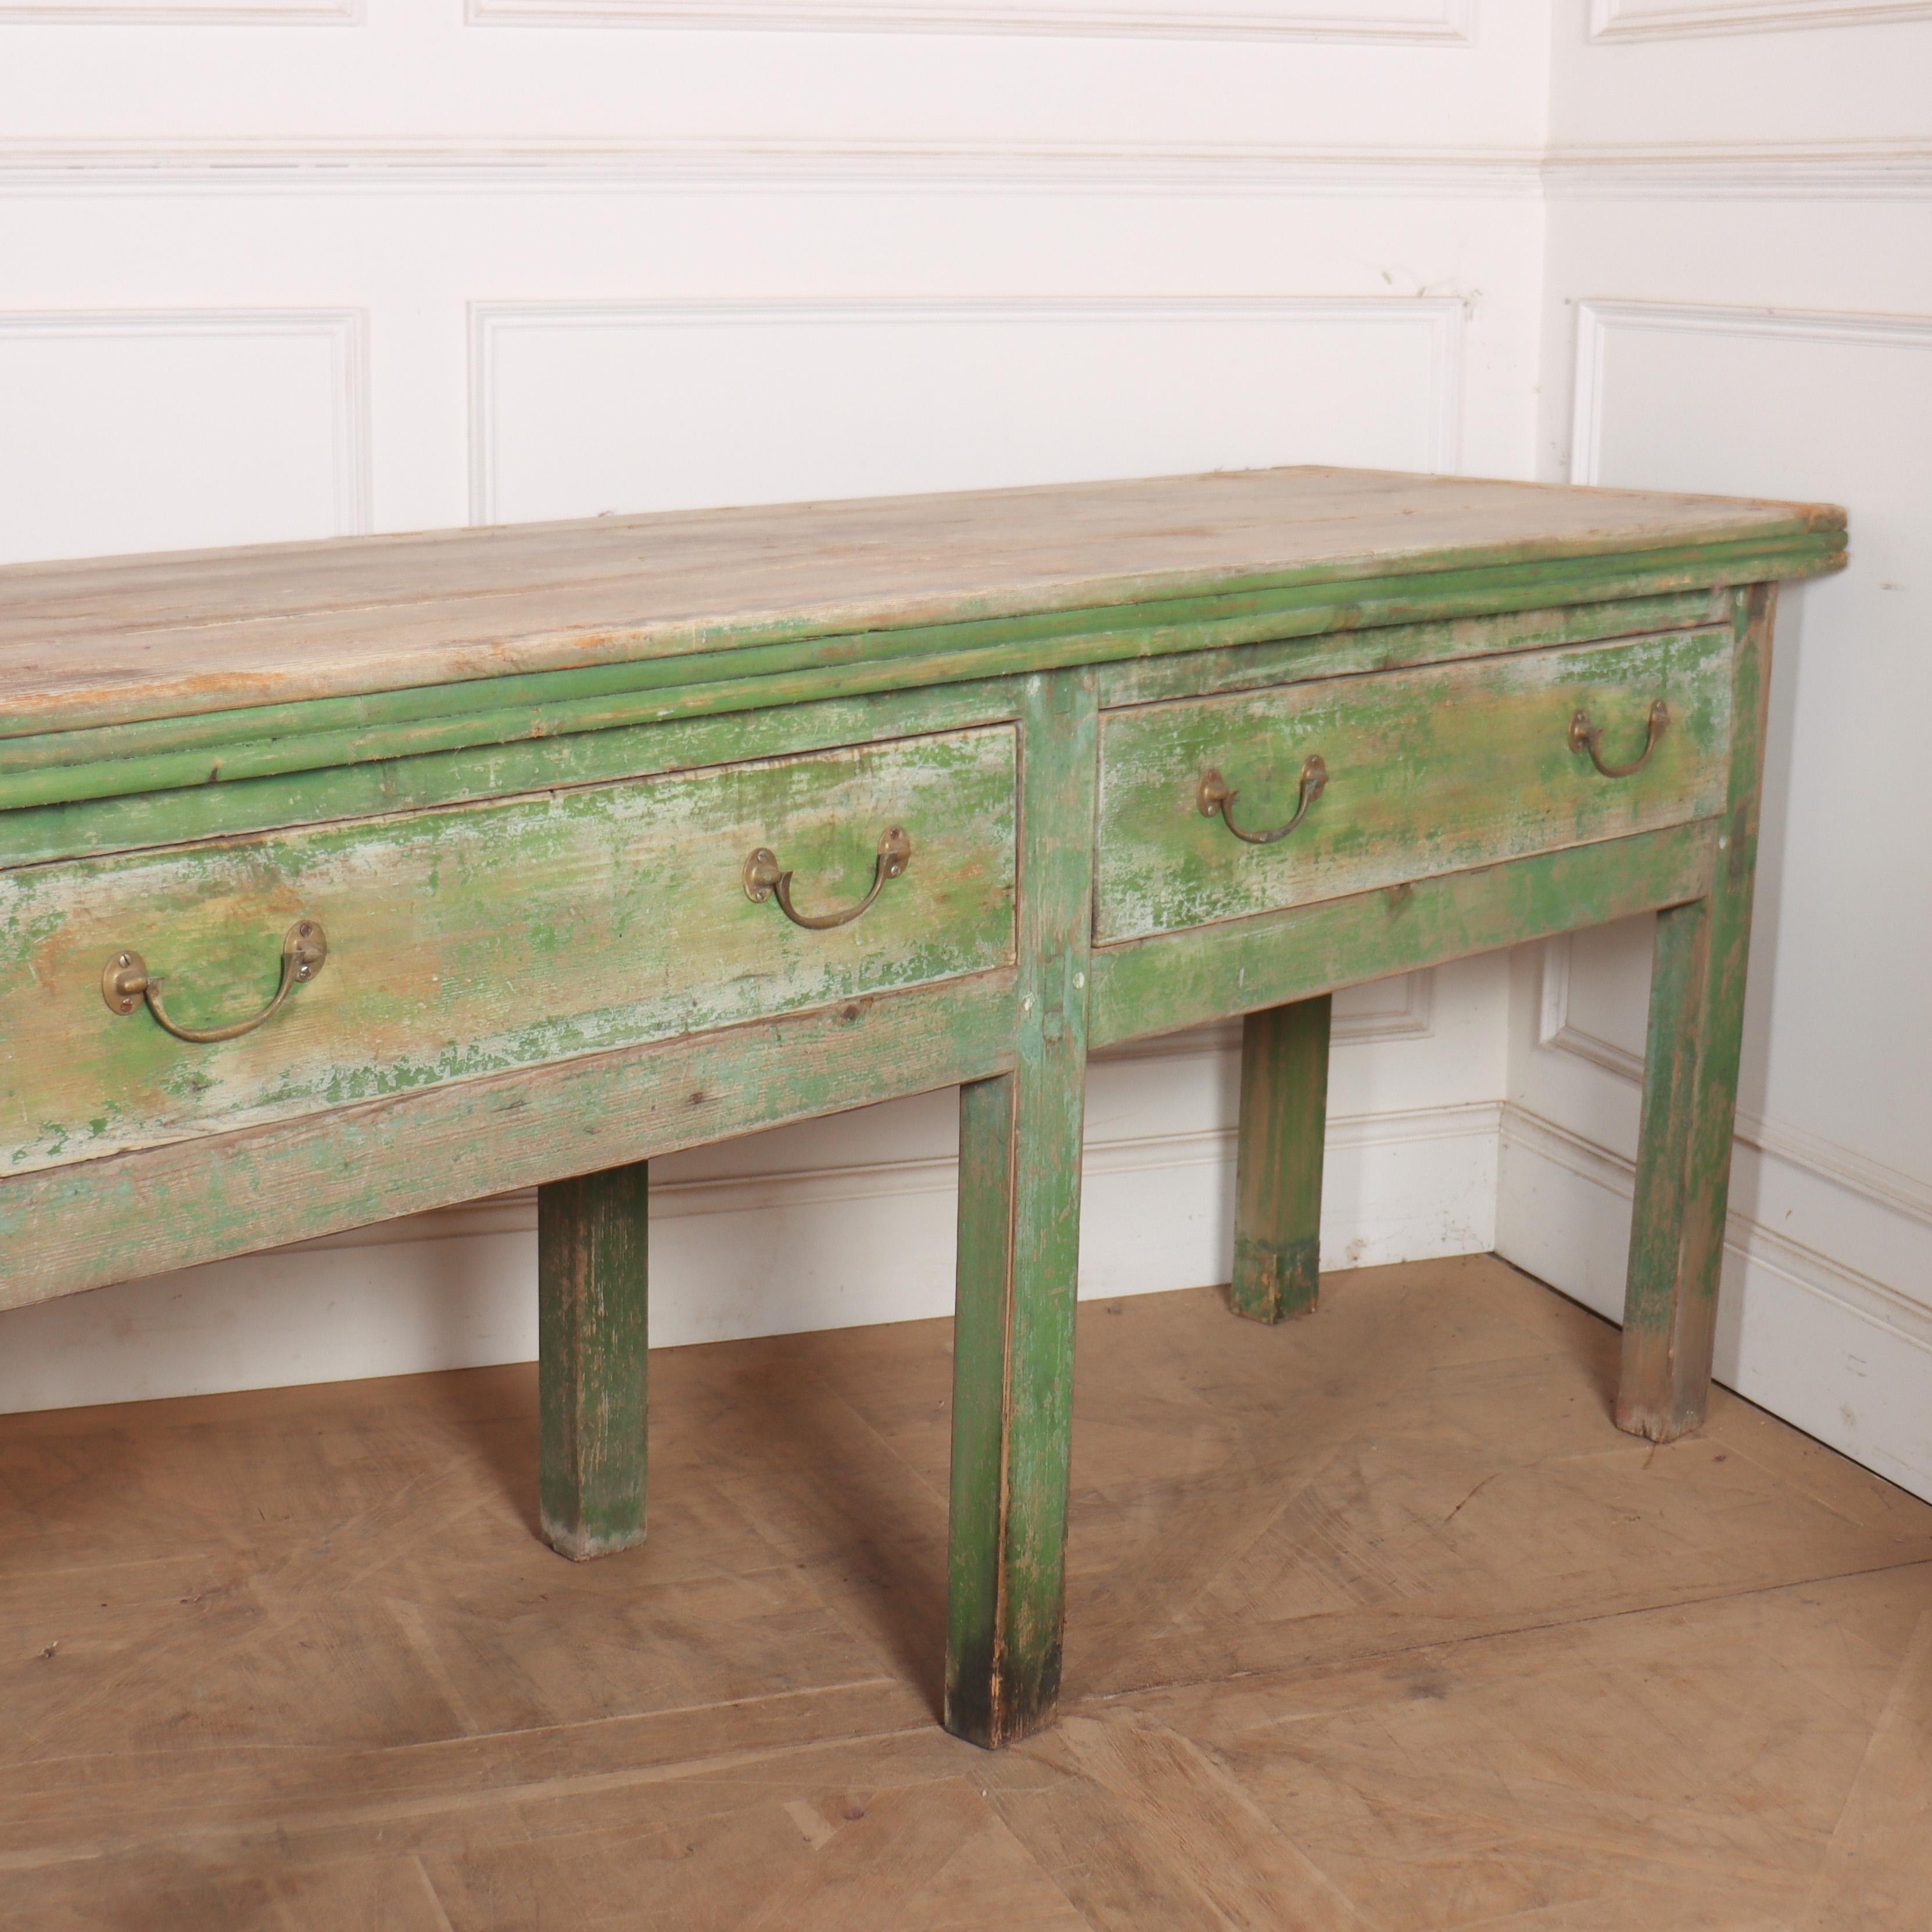 Original Painted English Dresser Base In Good Condition For Sale In Leamington Spa, Warwickshire